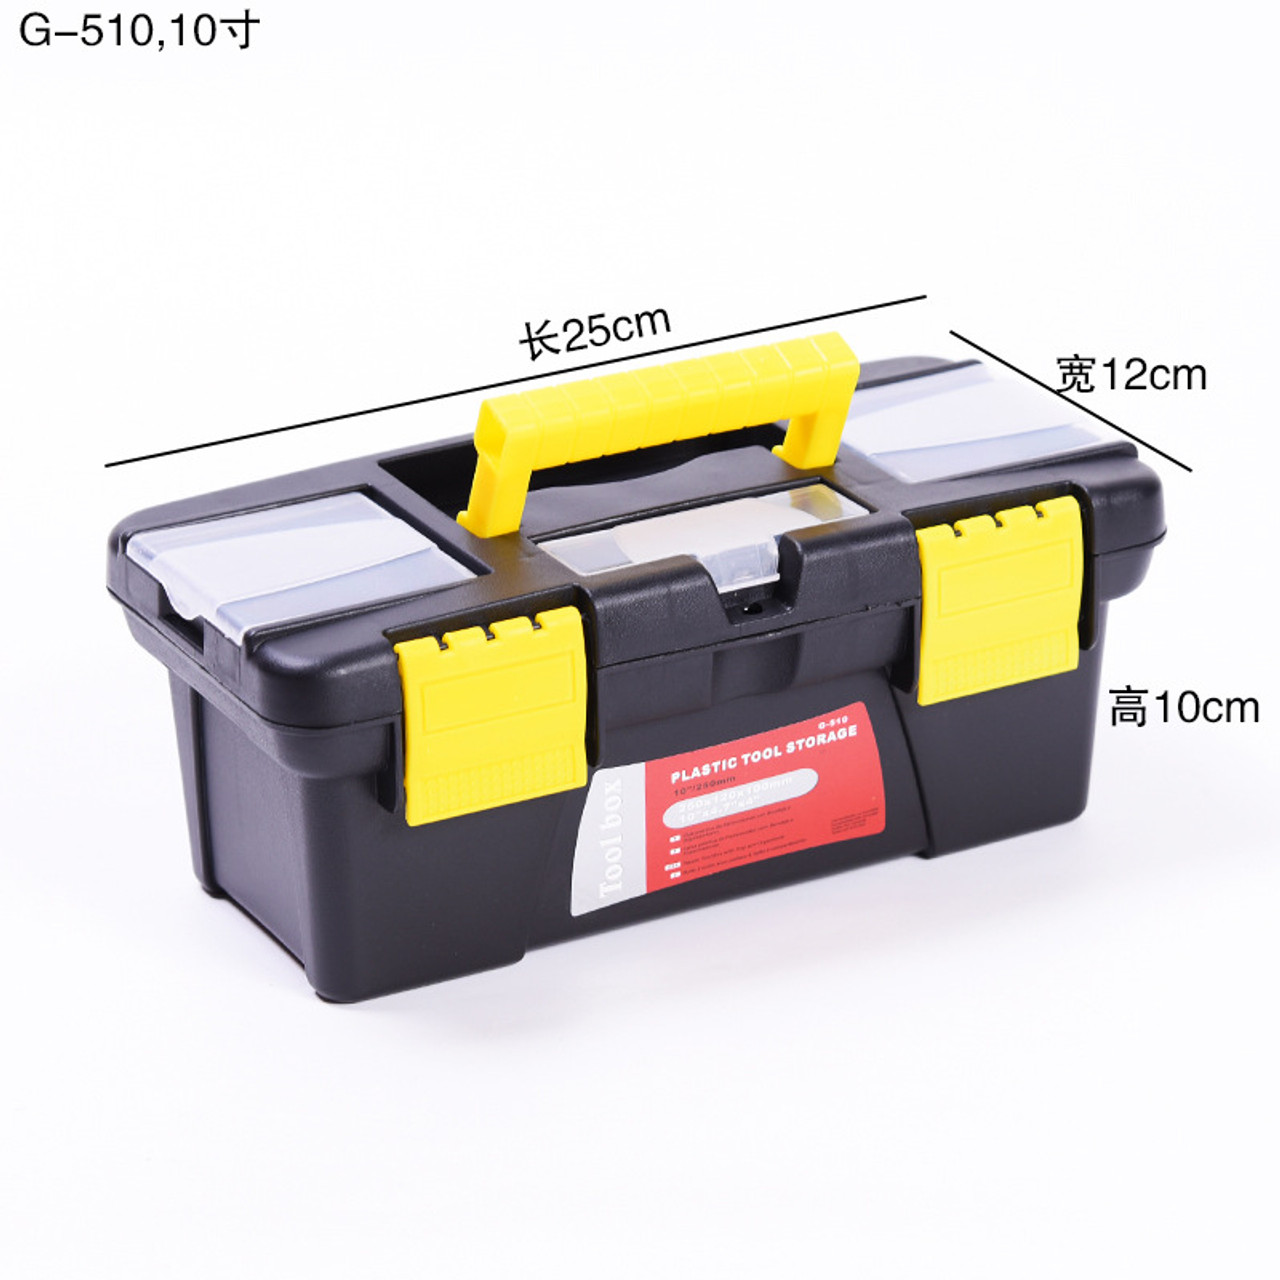 10-inch Portable Reinforced Compression Auto Repair Parts Tool Box